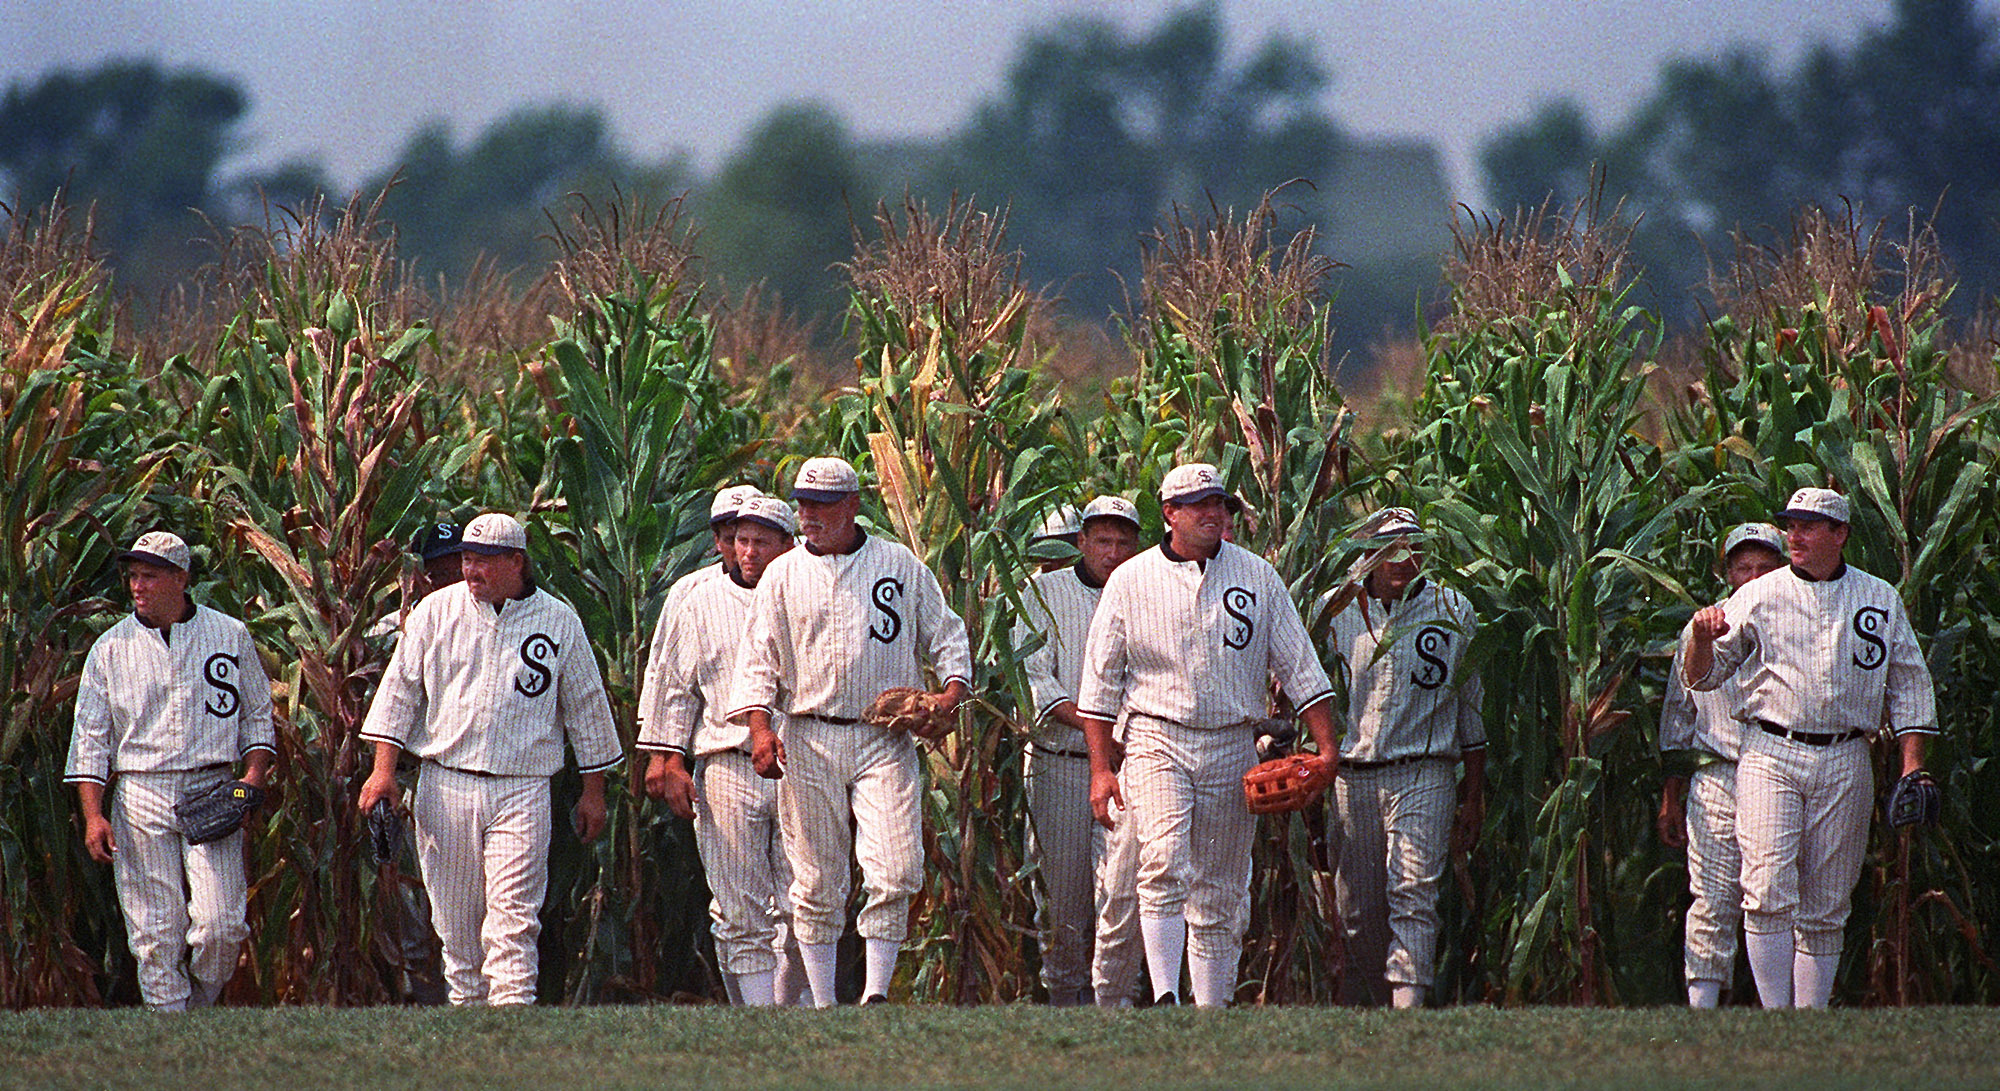 Chisox, Yanks deliver Hollywood ending to Field of Dreams game in Iowa